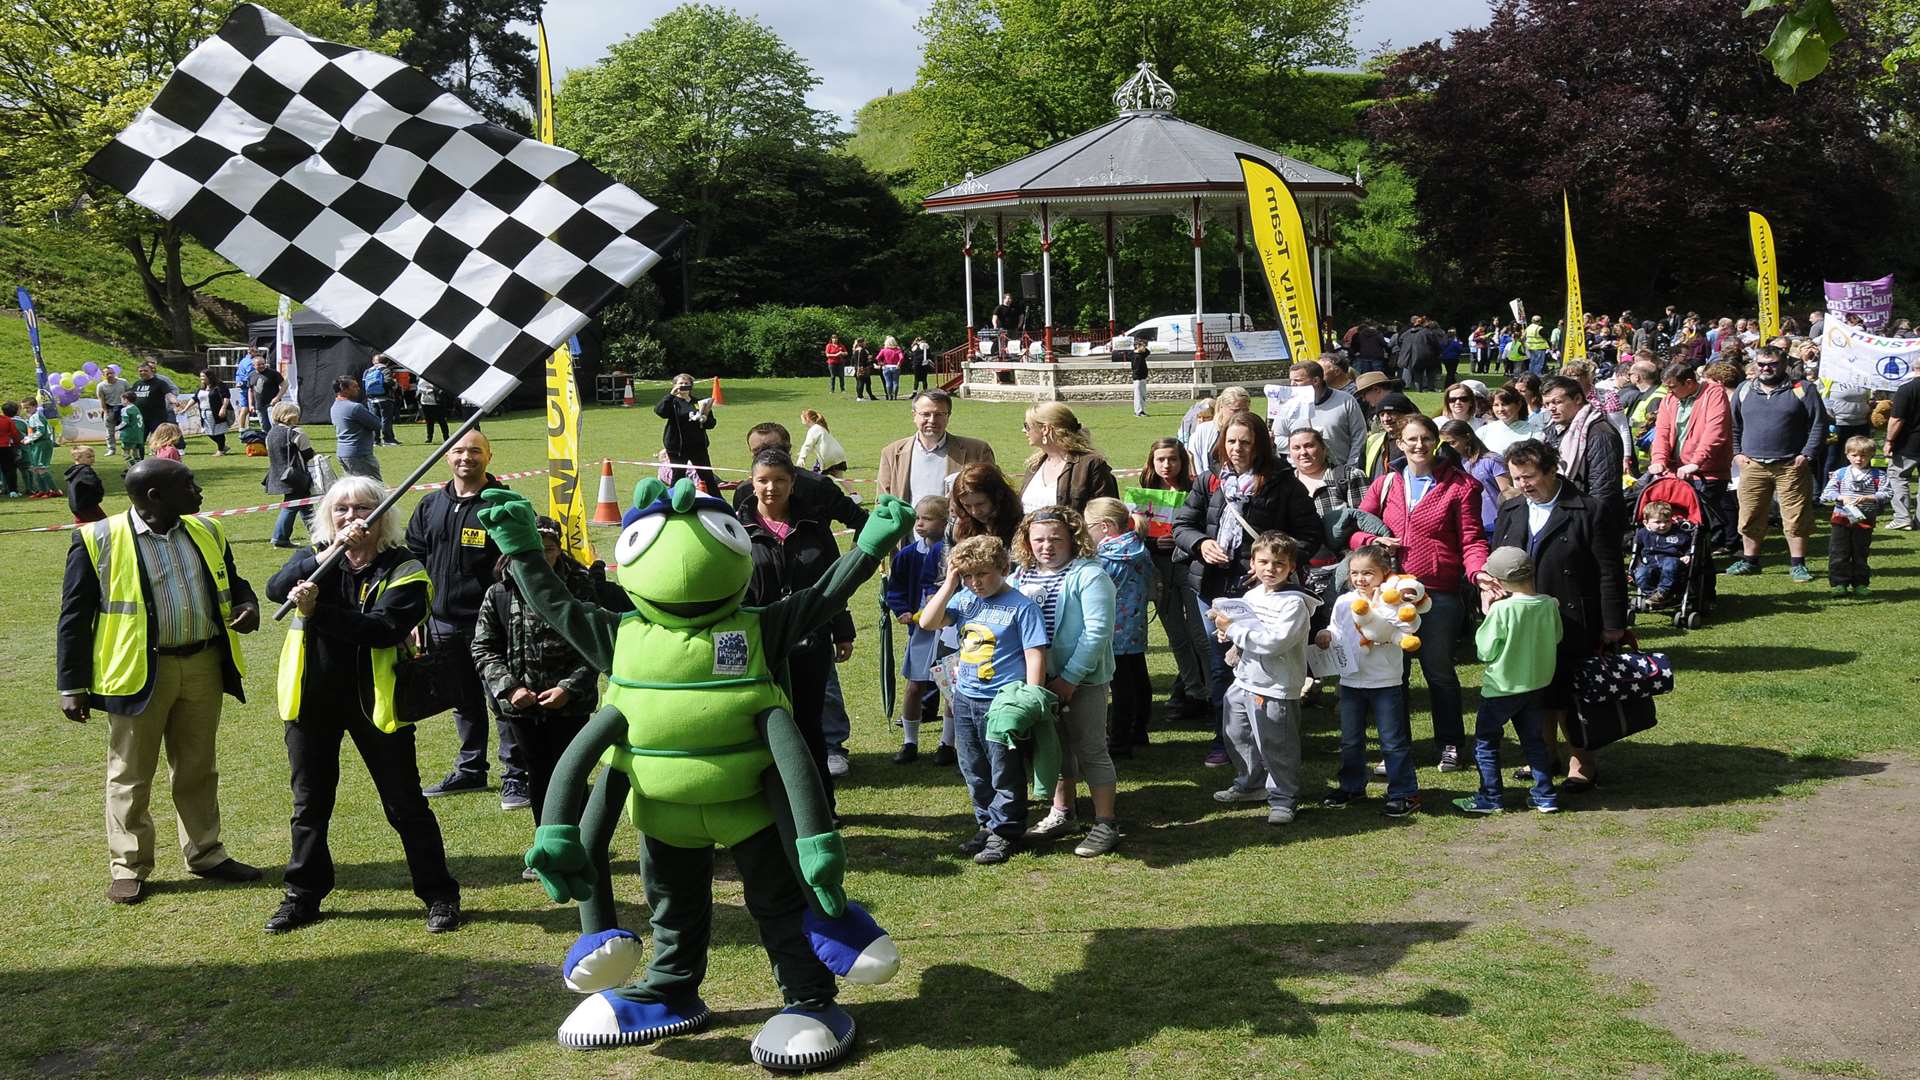 Buster leads the record-attempting ‘Crocodile’ Walking Bus at Buster’s Big Bash 2015, staged at Canterbury’s Dane John Gardens.